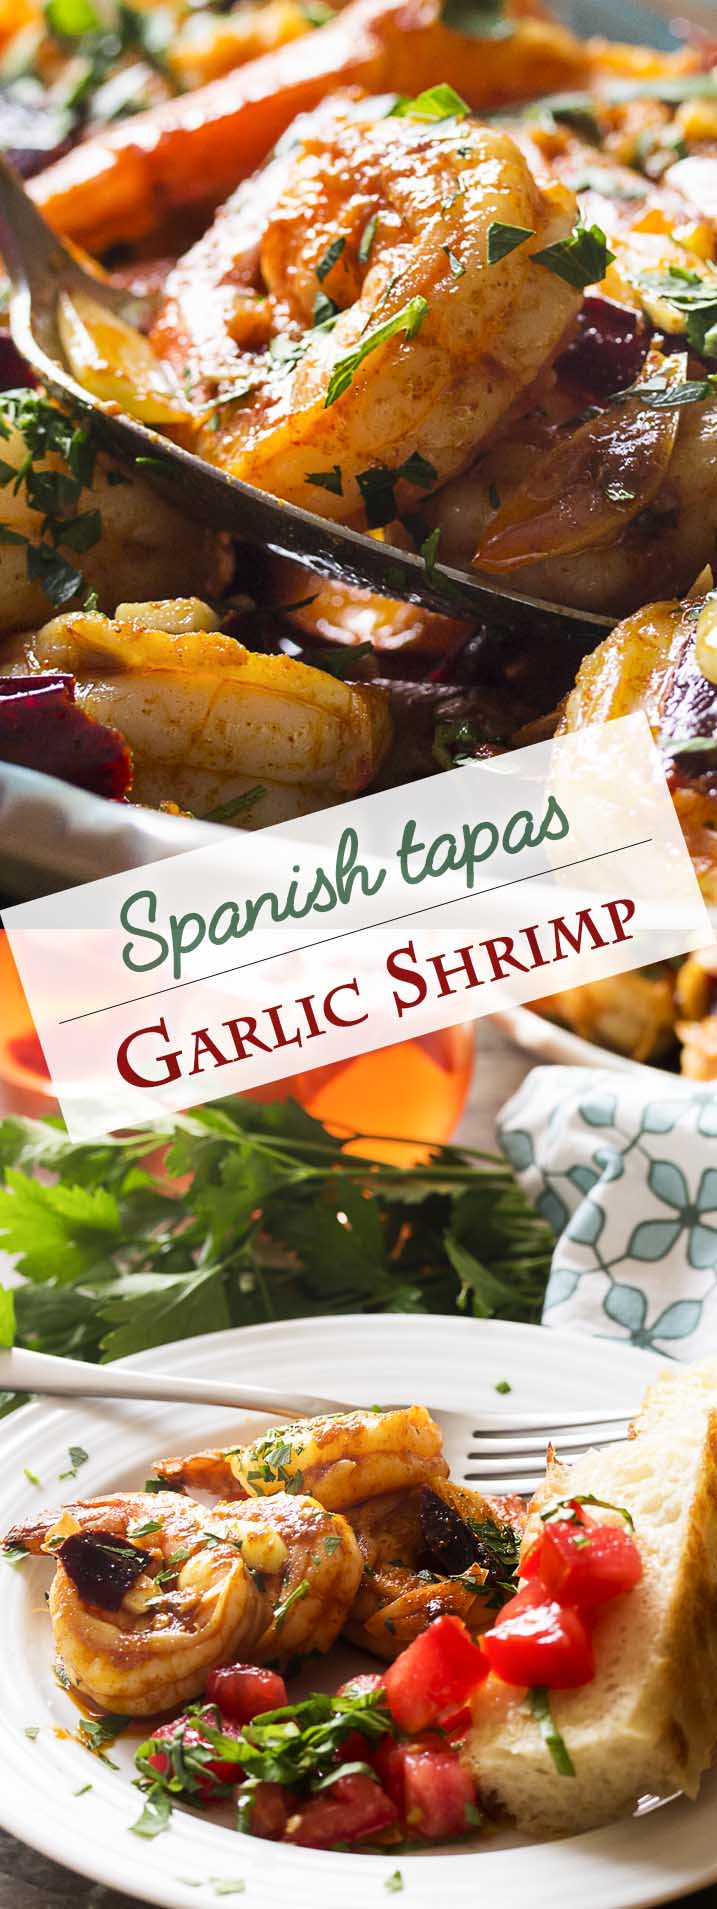 Plump and juicy shrimp, soft sliced garlic, and sweet and smoky paprika combine in this classic tapas recipe for Spanish garlic shrimp. Quick and easy! Make sure you have plenty of bread to soak up the flavorful olive oil! | justalittlebitofbacon.com